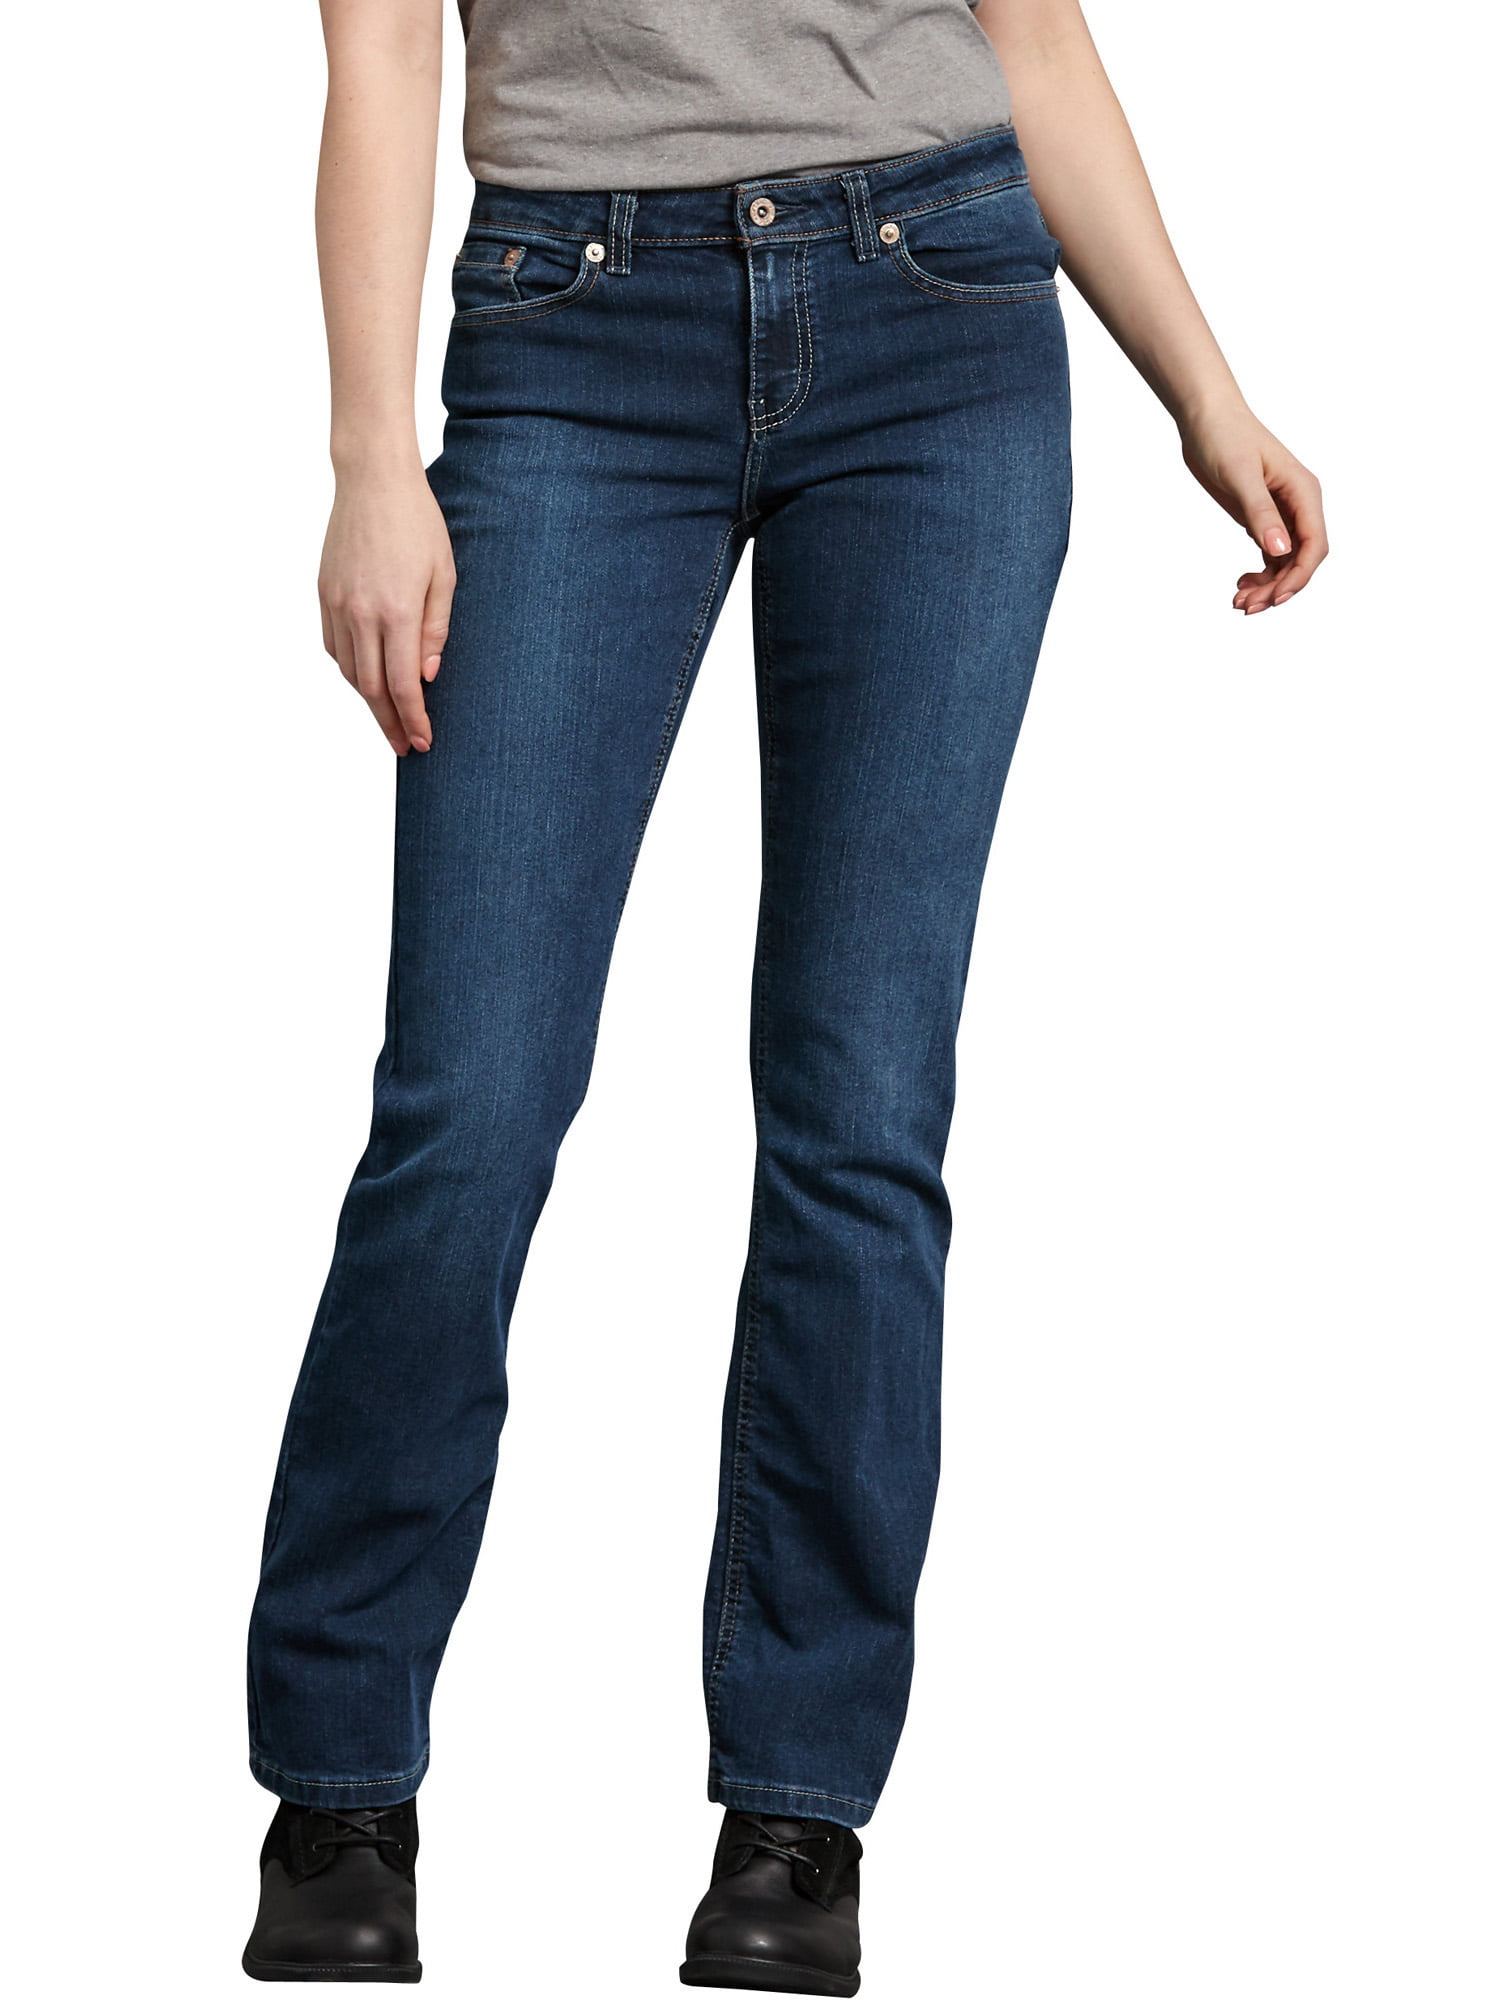 women's relaxed fit bootcut jeans